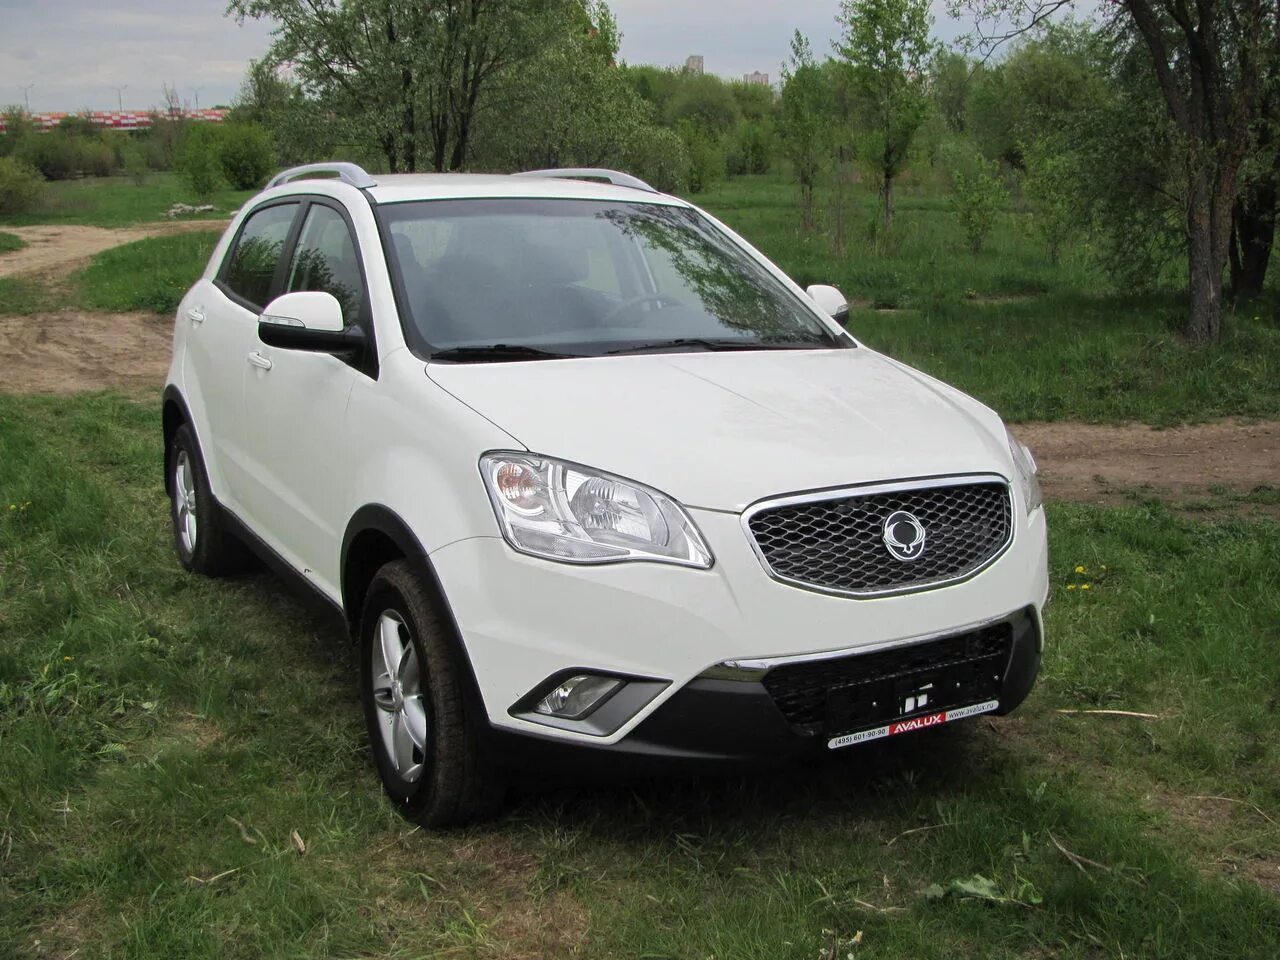 SSANGYONG Actyon 2. SSANGYONG Actyon 2011. SSANGYONG Actyon New 2. SSANGYONG Actyon II, 2011.